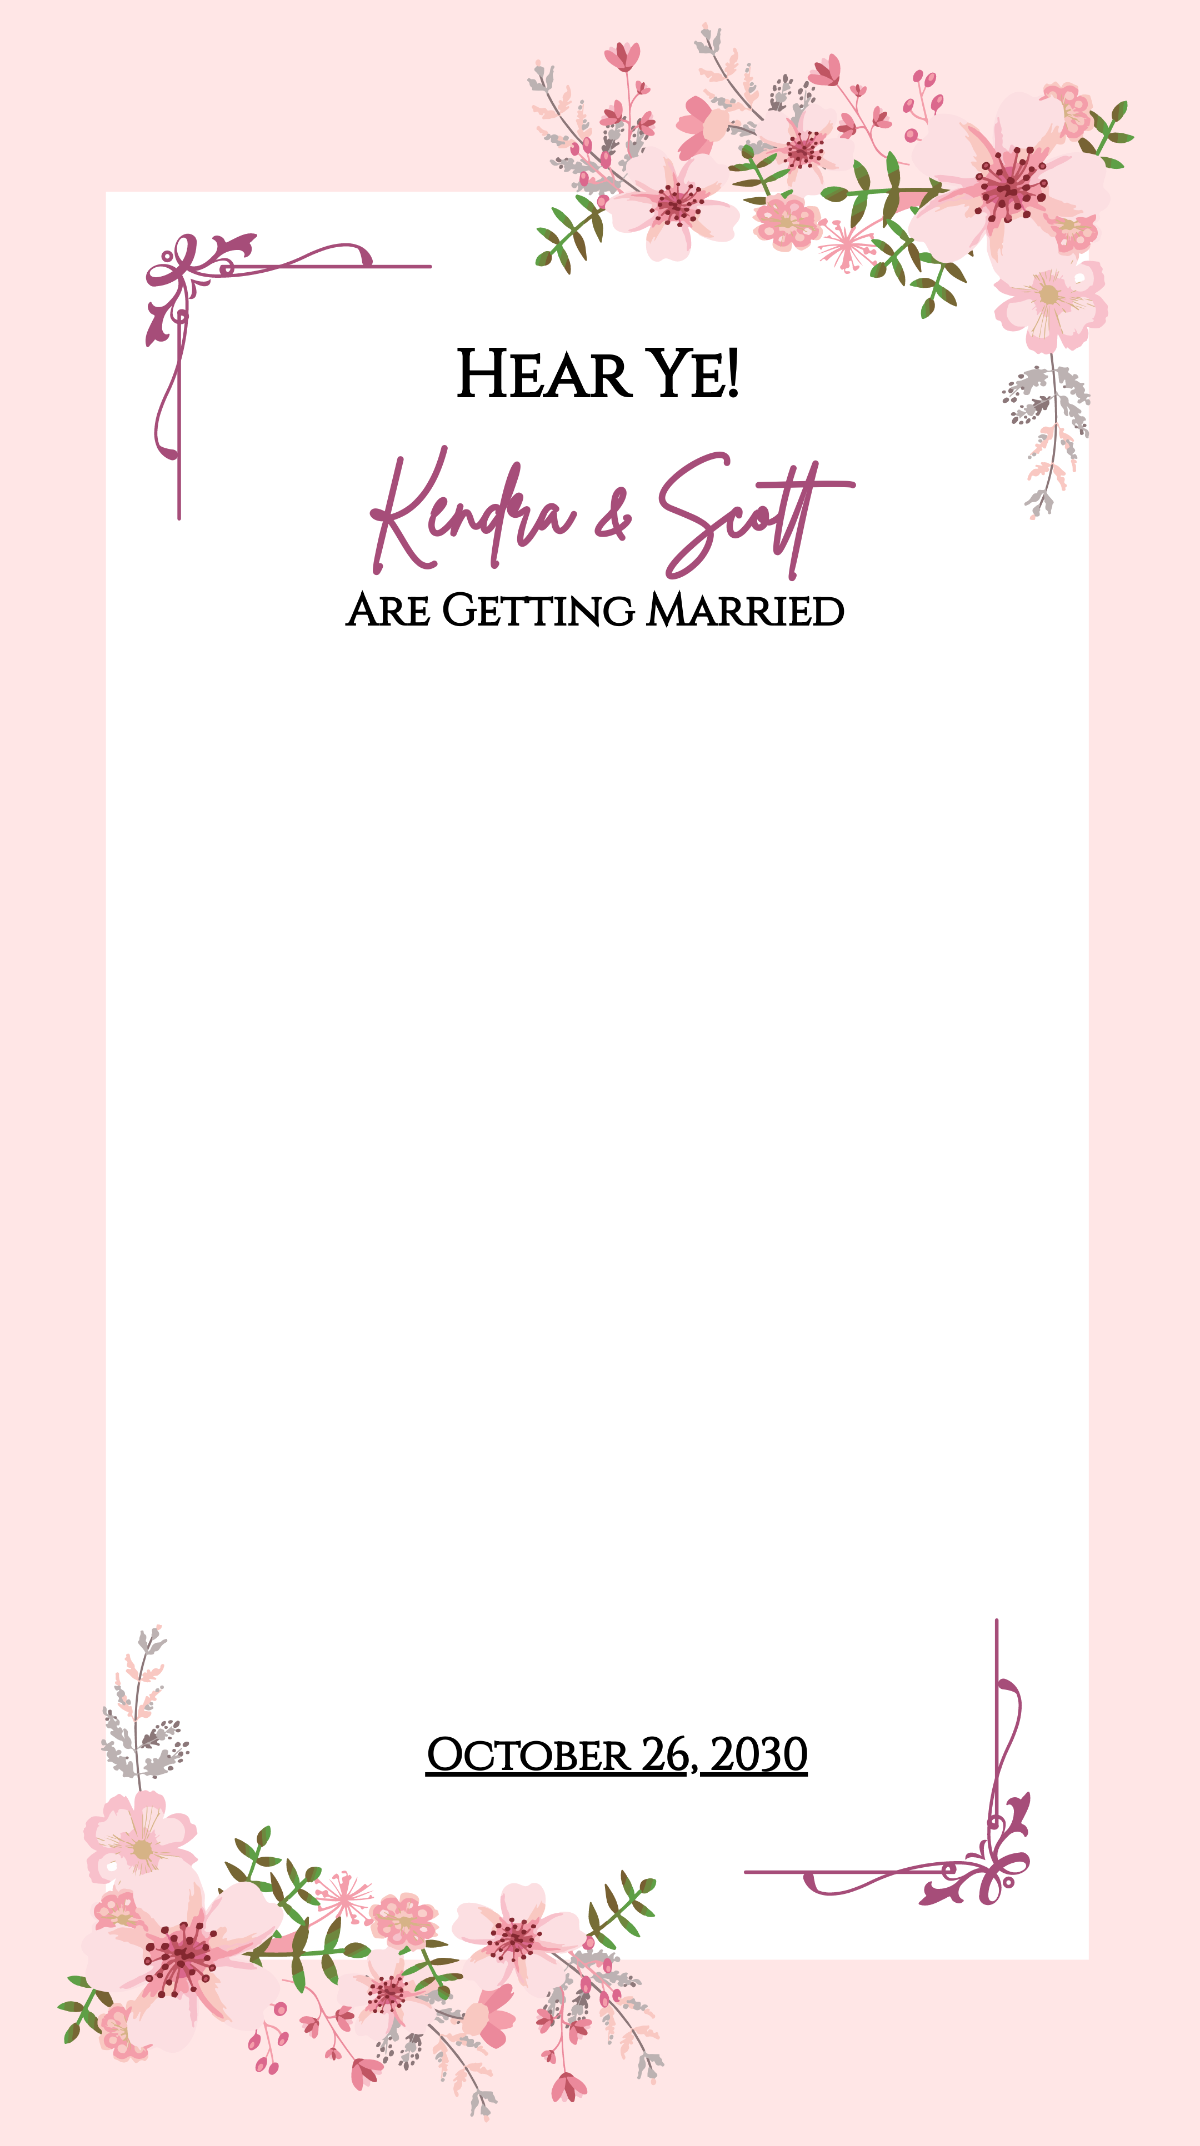 Free Wedding Announcement Snapchat Geofilter Template